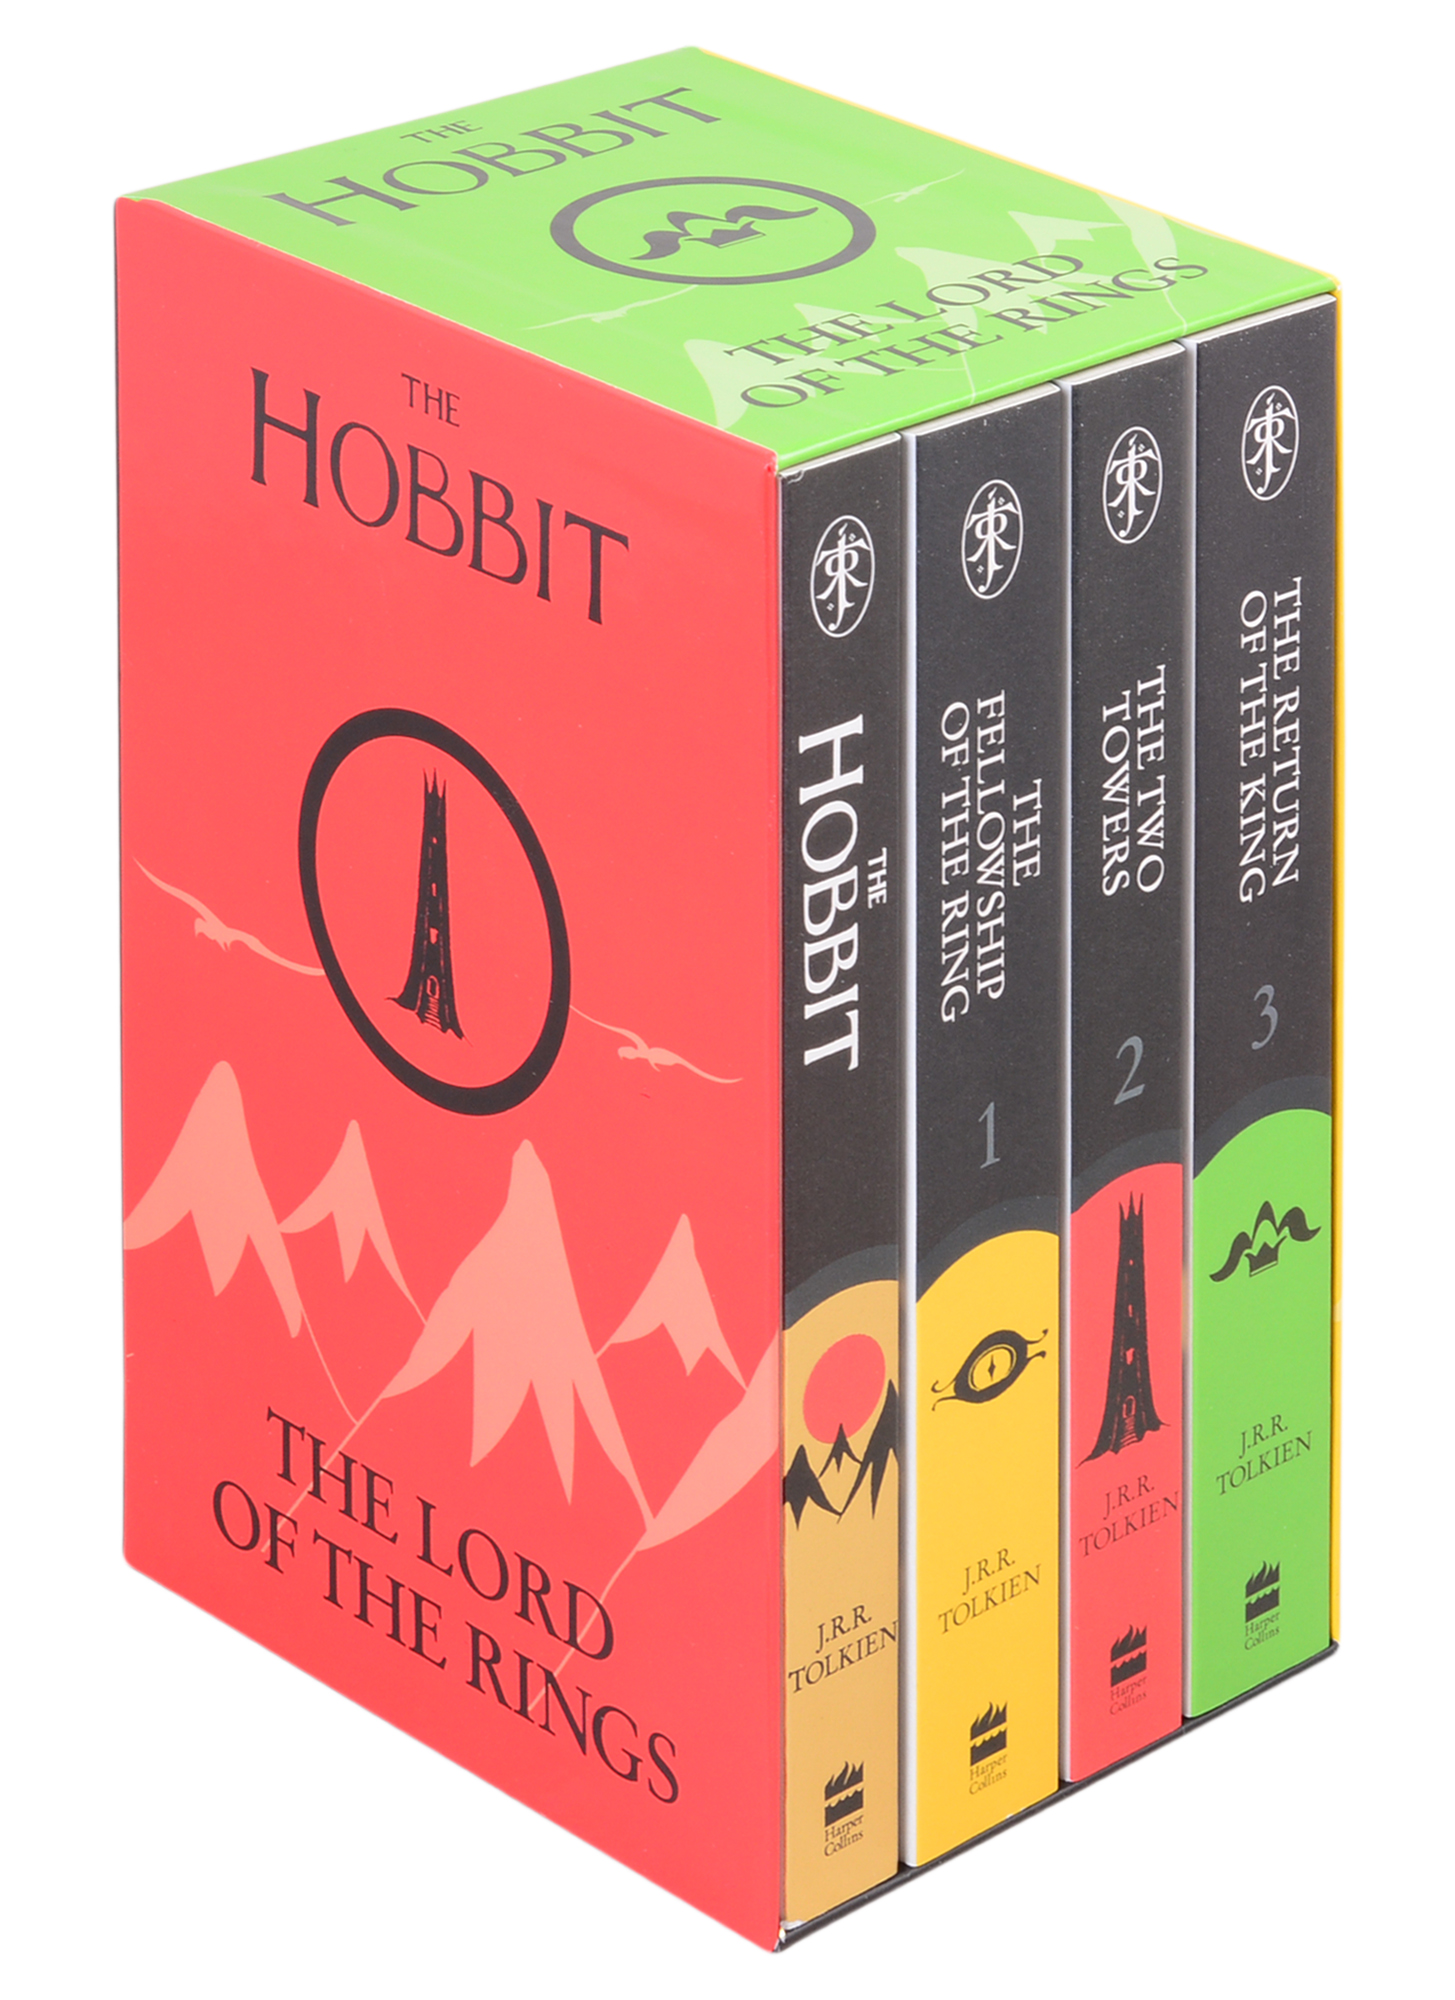 Толкин Джон Рональд Руэл The Hobbit and the Lord of the Rings: Gift Set 4 vol. толкин джон рональд руэл lord of the rings box